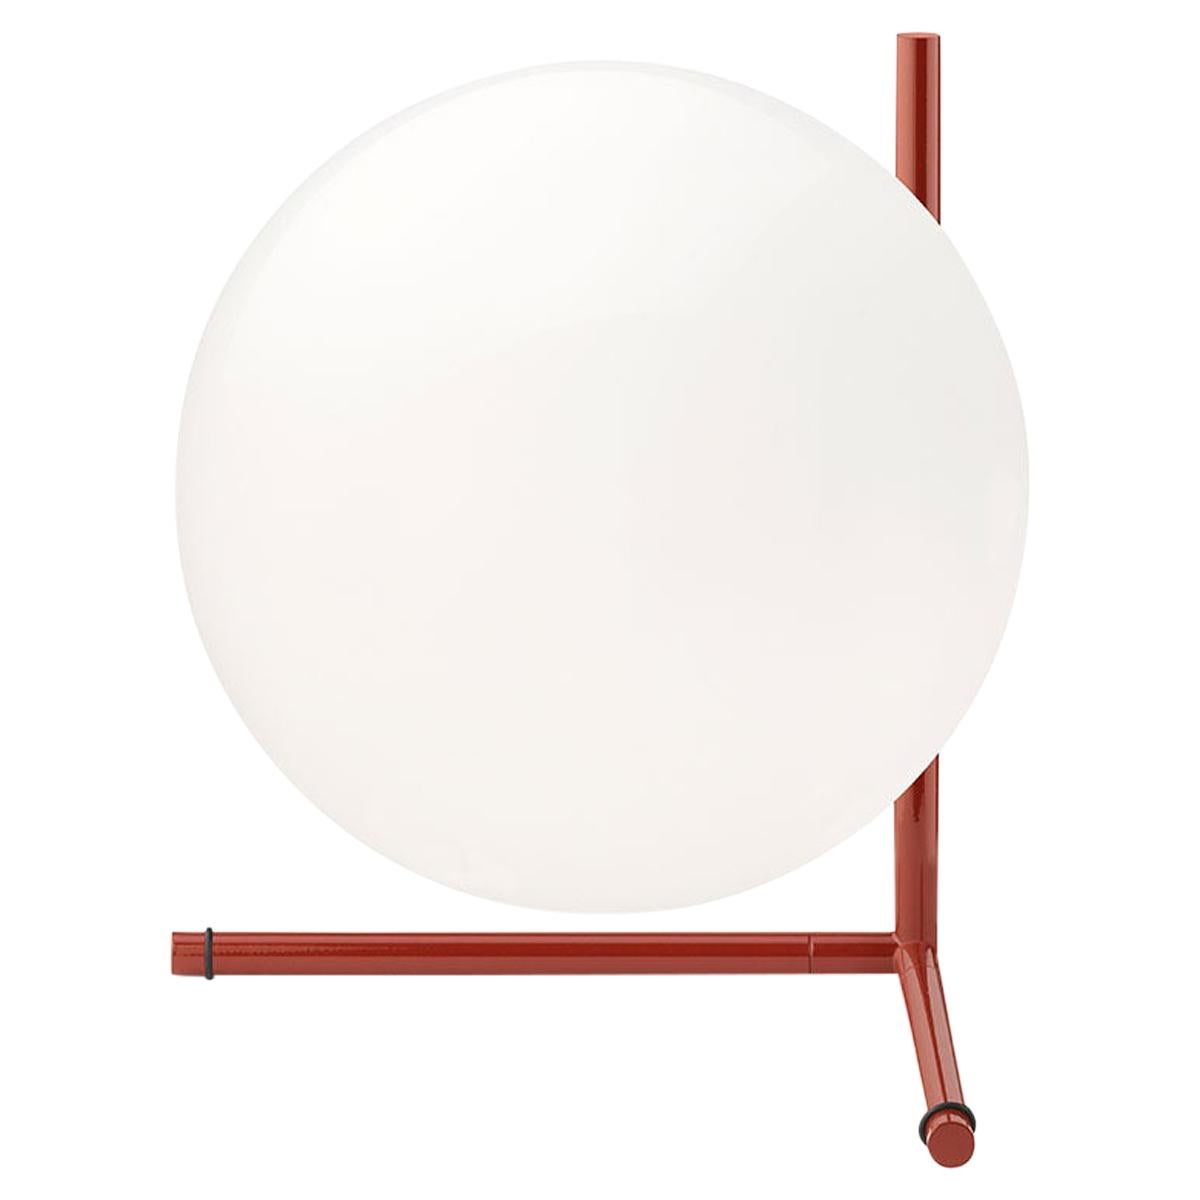 Flos IC Lights T2 Dimmable Table Lamp in Burgundy by Michael Anastassiades